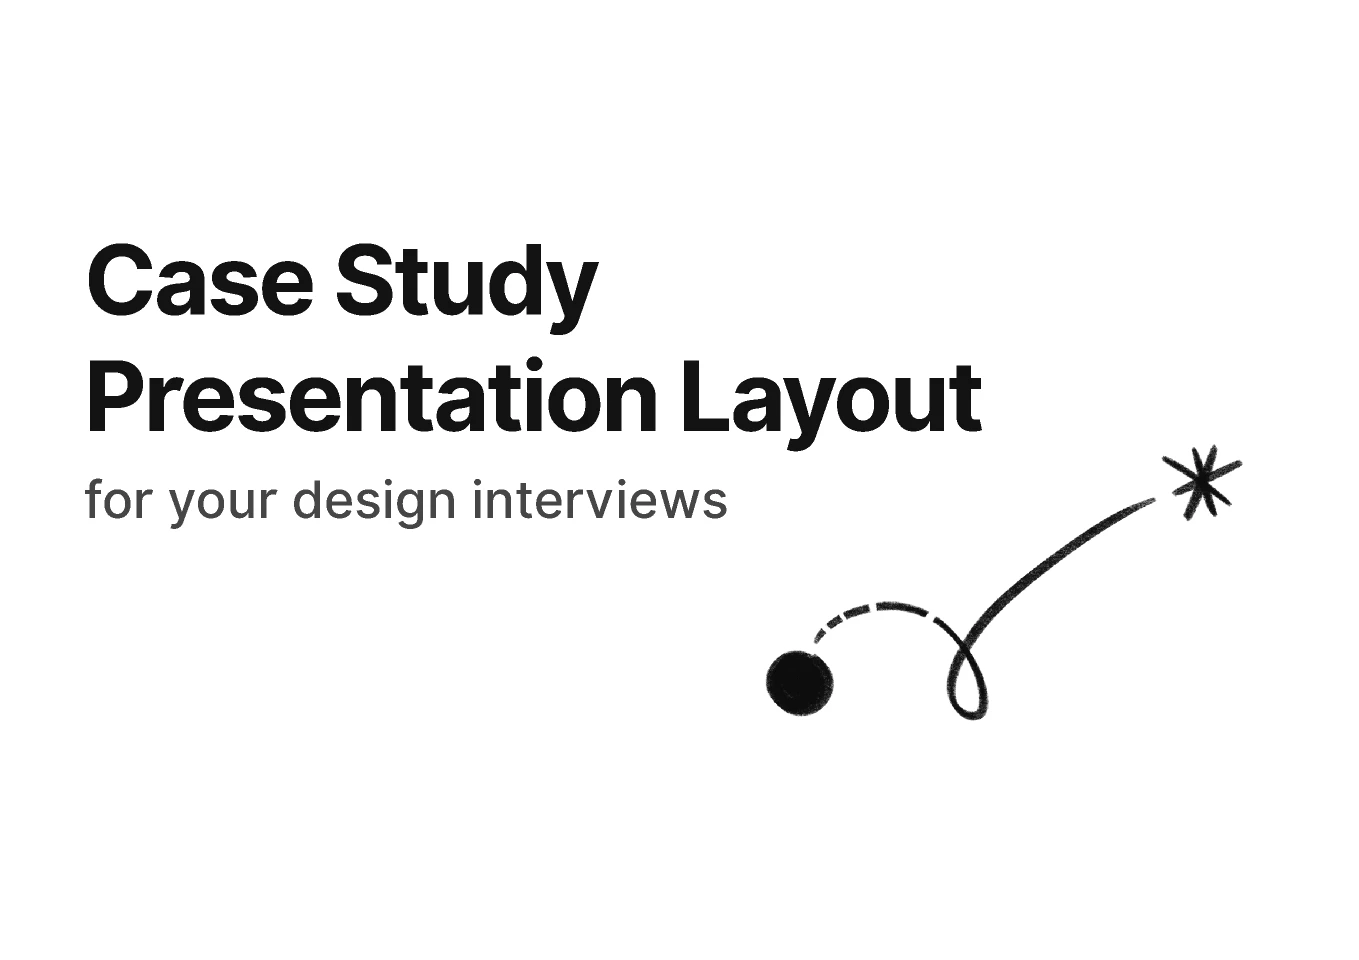 Case Study Presentation Layout for Design Interviews for Figma and Adobe XD